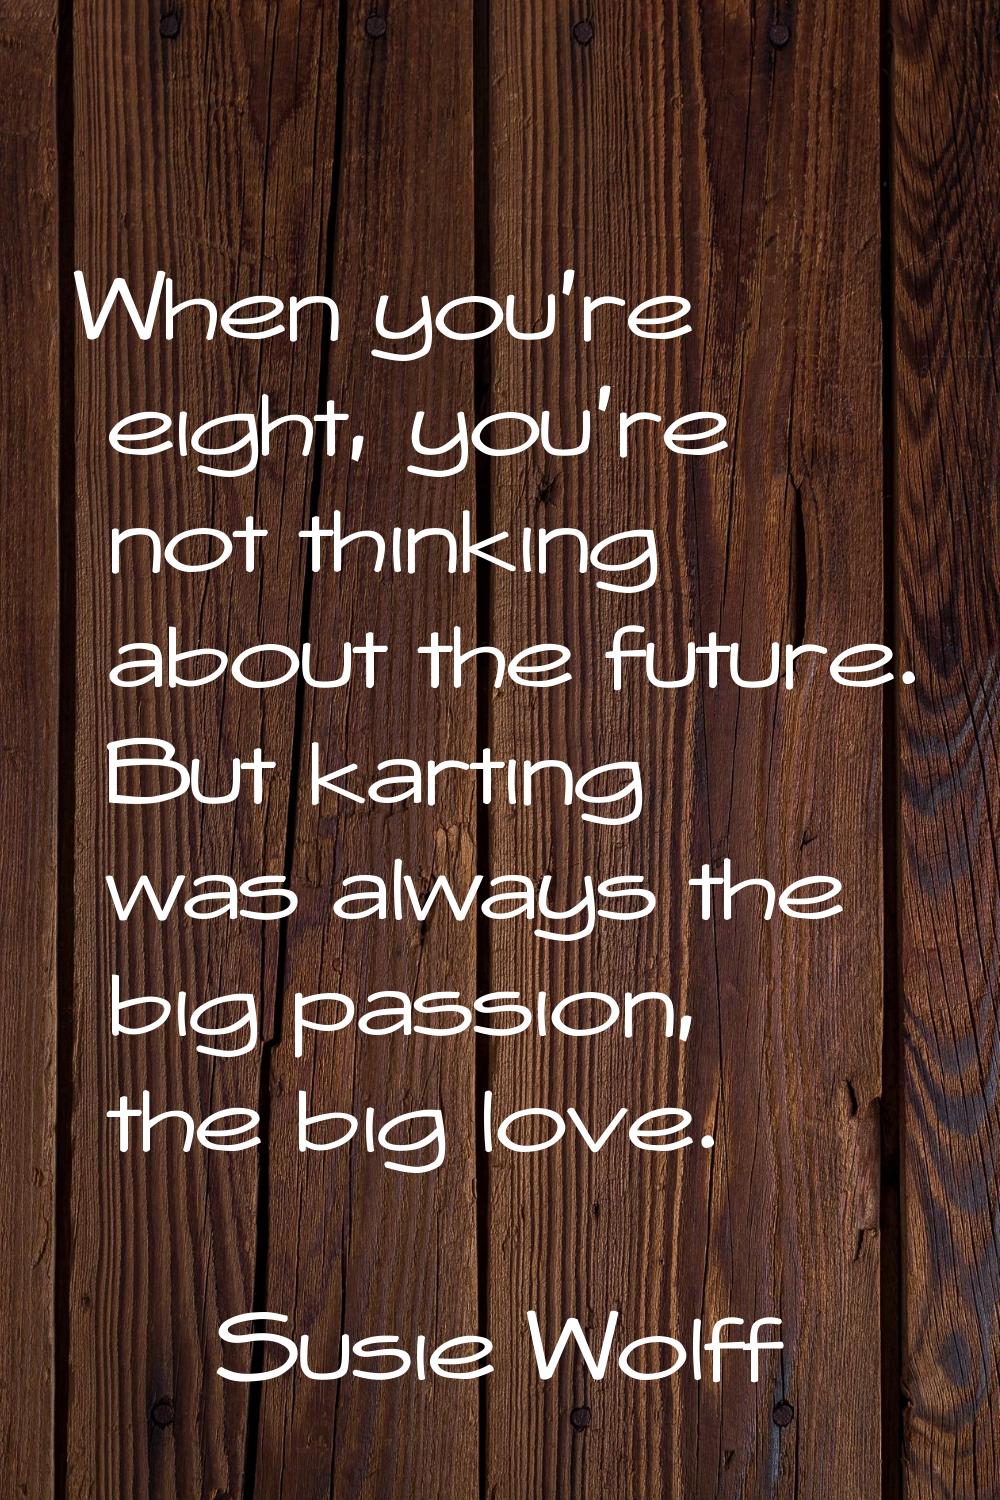 When you're eight, you're not thinking about the future. But karting was always the big passion, th